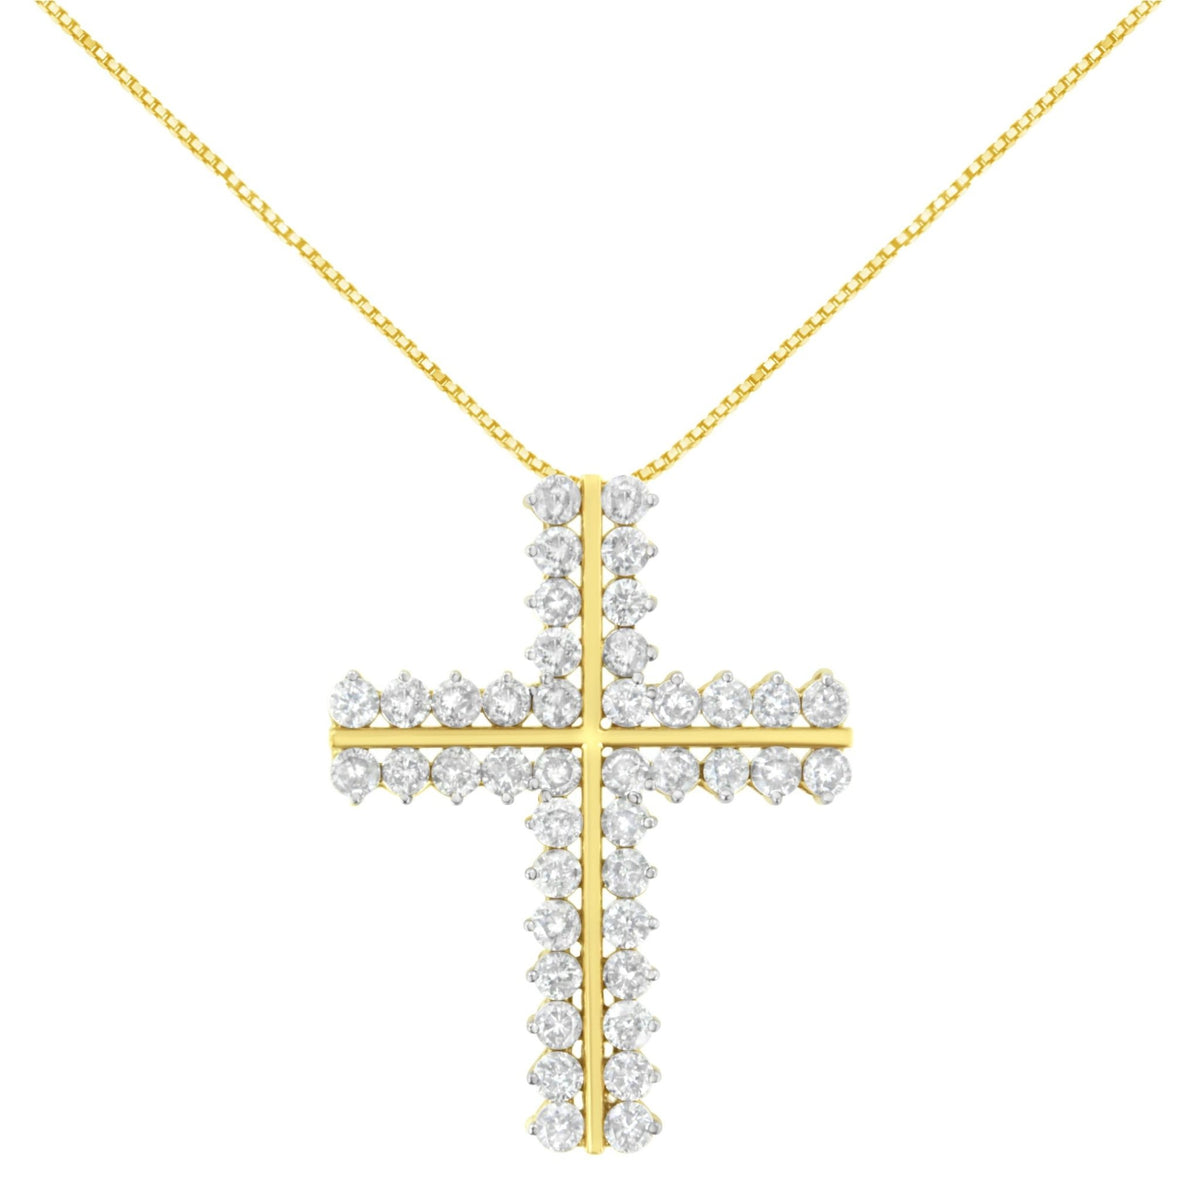 10K Yellow Gold 4.0 Cttw Diamond Two Row Cross 18&quot; Pendant Necklace (J-K Clarity, I1-I2 Color) - LinkagejewelrydesignLinkagejewelrydesign